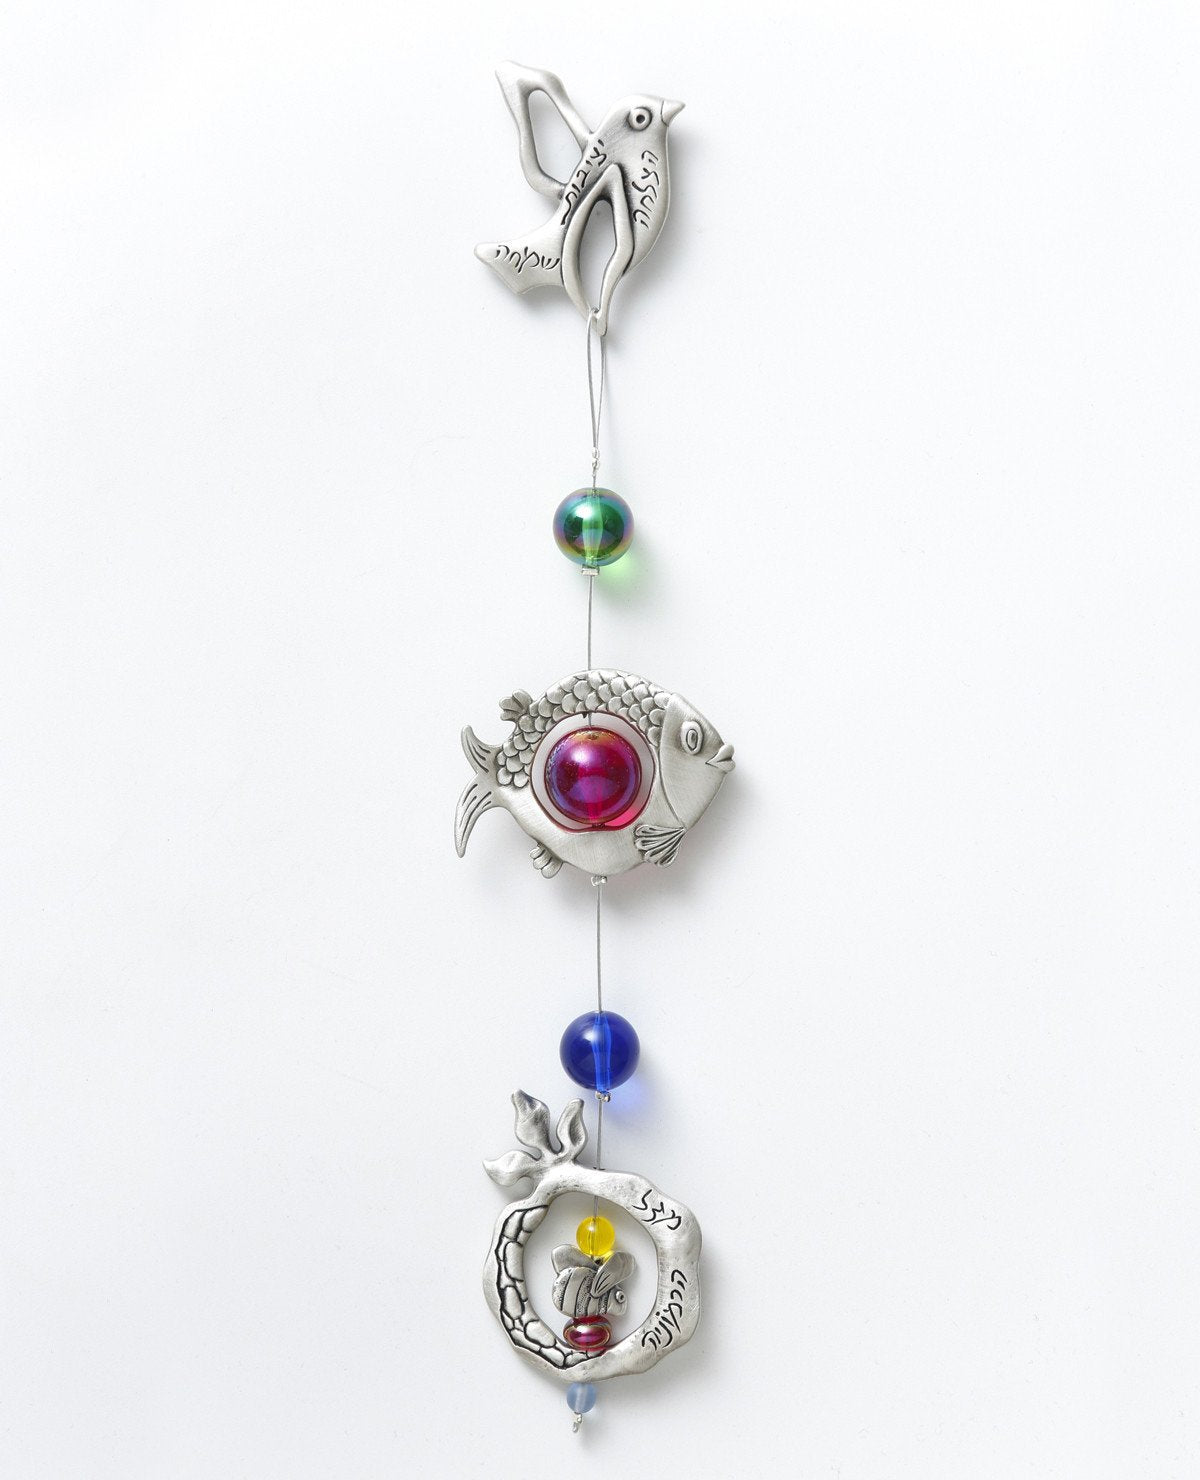 A delicate and beautiful hanging wall ornament, bringing together a few blessing motifs: a bird, a fish and a pomegranate, all hanging from a subtle silver string. The ornament is coated in sterling silver and is decorated with colorful beads. The bird and pomegranate are engraved with words of blessing for harmony, luck, success, stability, and joy. Makes a charming gift for any occasion and for anywhere in the house or office. It's so pleasant to gaze at this lovely ornament and smile every moment with gr